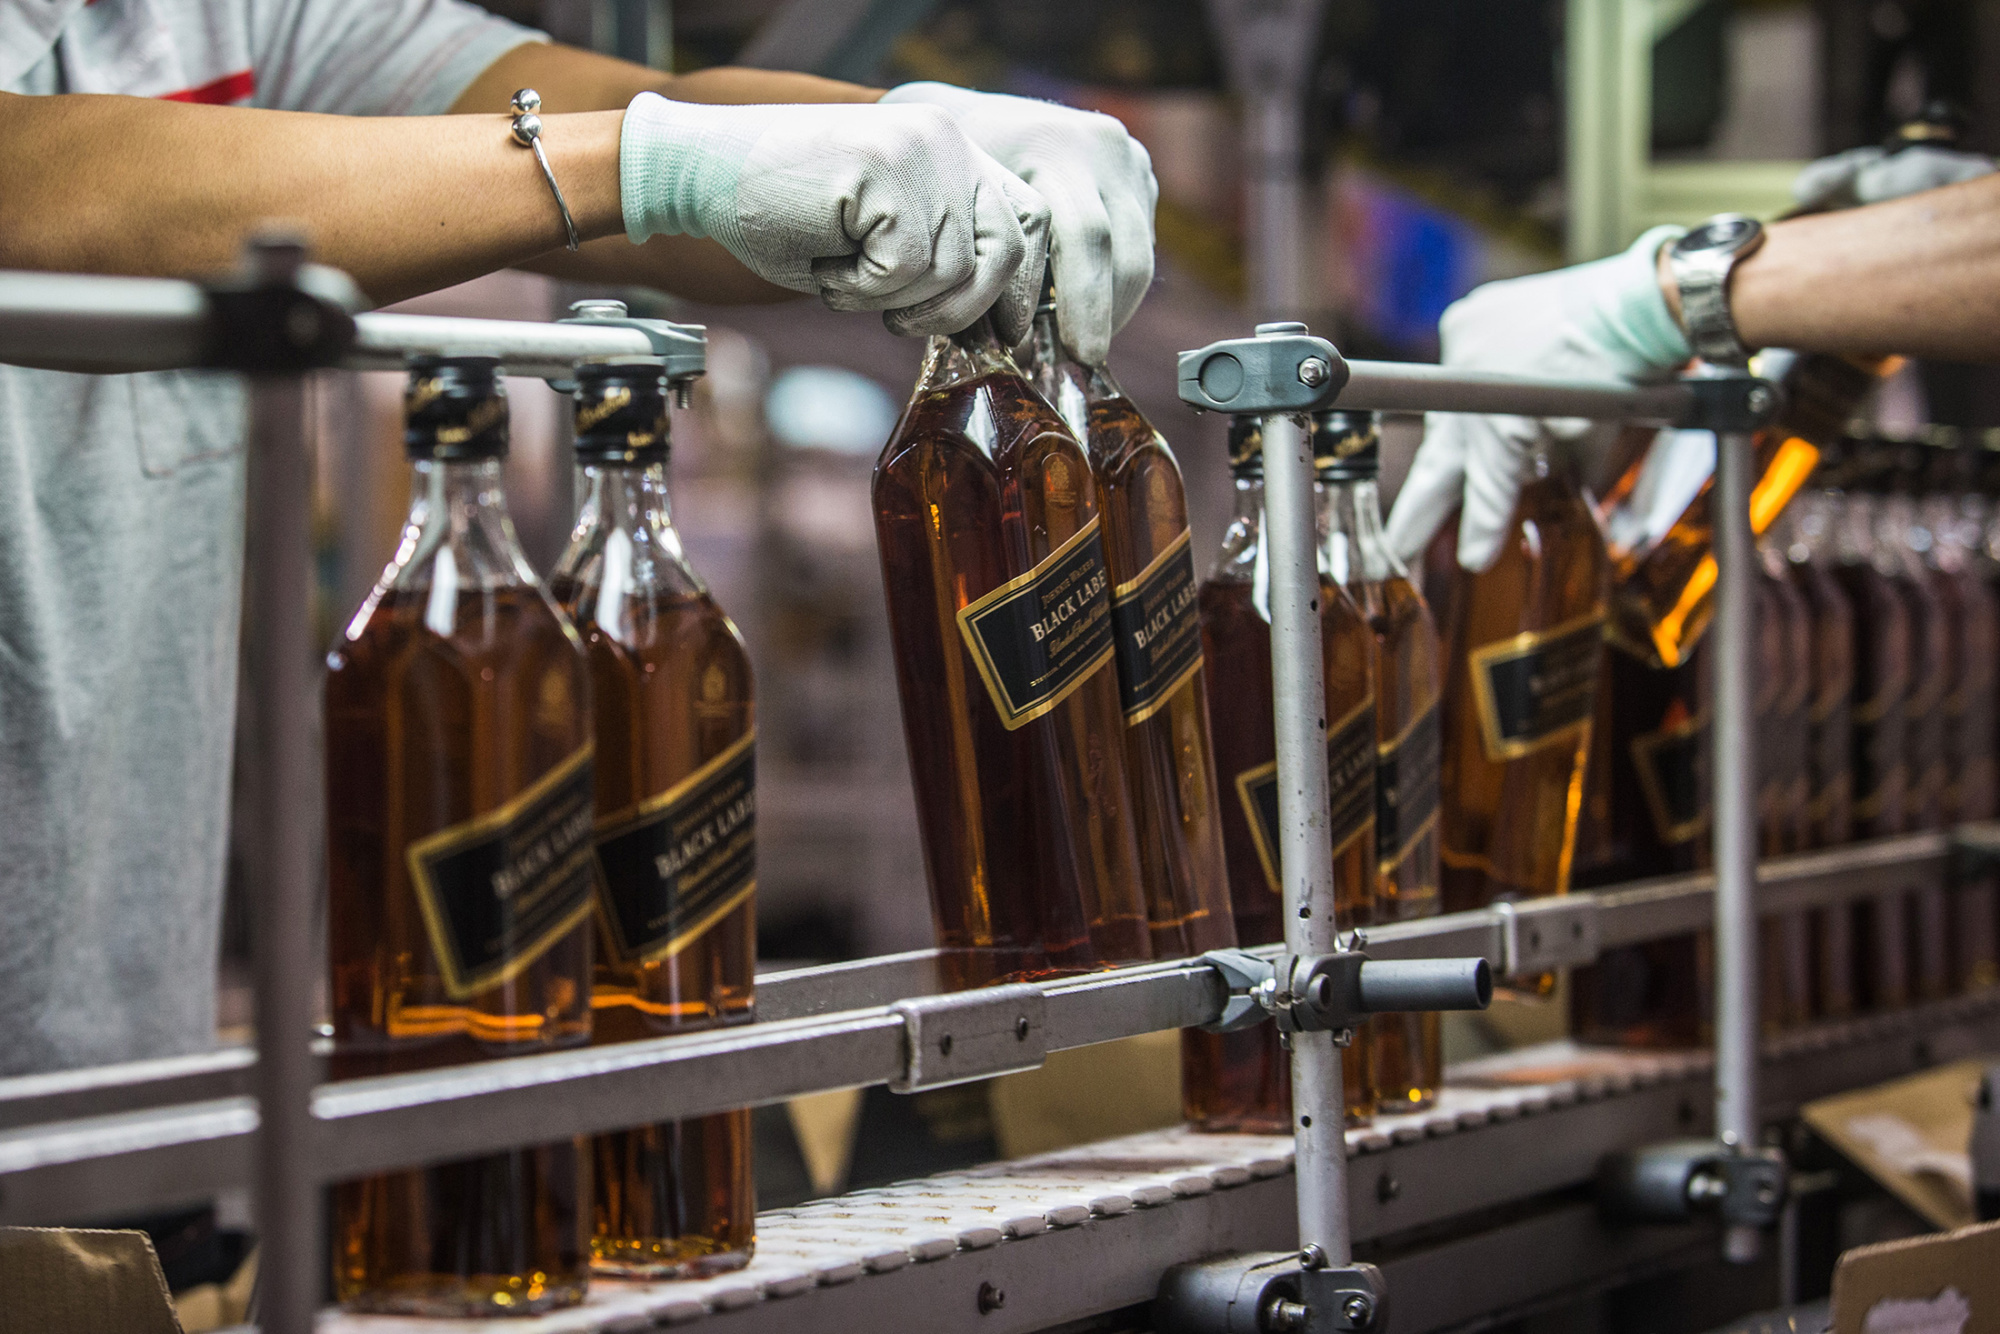 Employees box bottles of Johnnie Walker Black Label Scotch on the postponement line at the Diageo Plc International Supply Center and Technical Centre in Singapore, on Wednesday, Aug. 26, 2015.
